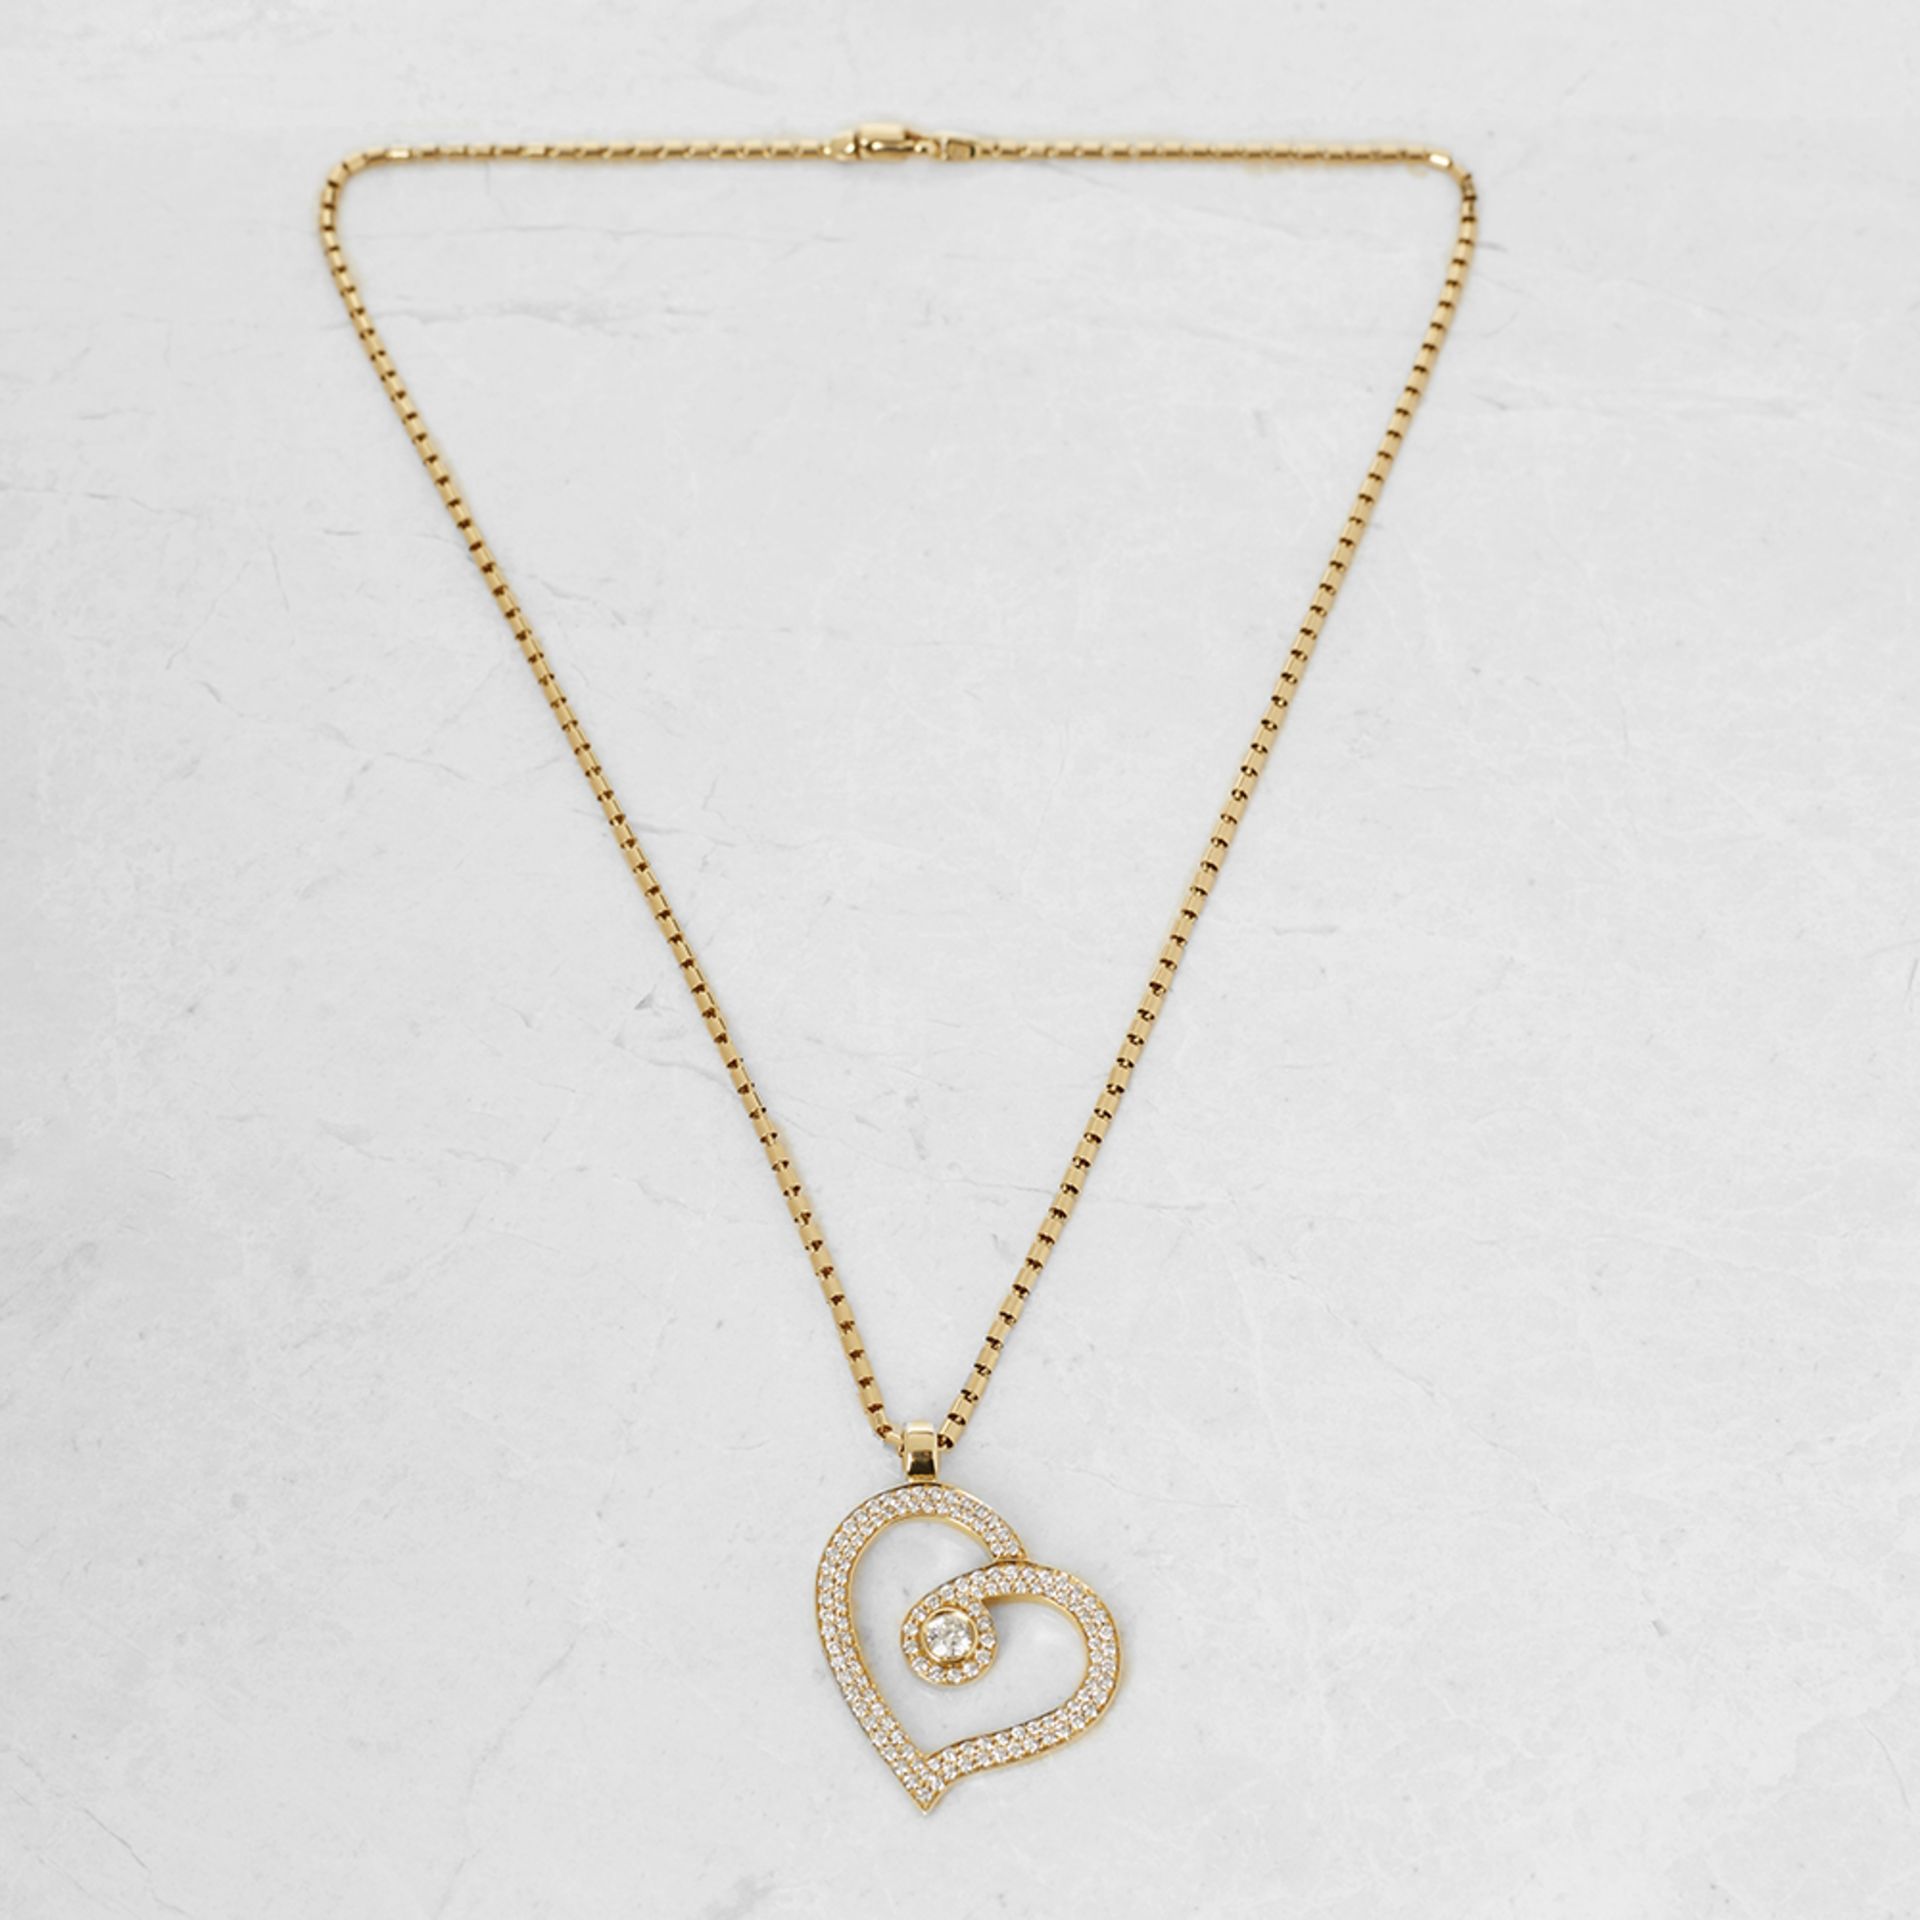 Roberto Coin 18k Yellow Gold Diamond Heart Necklace - Image 7 of 11